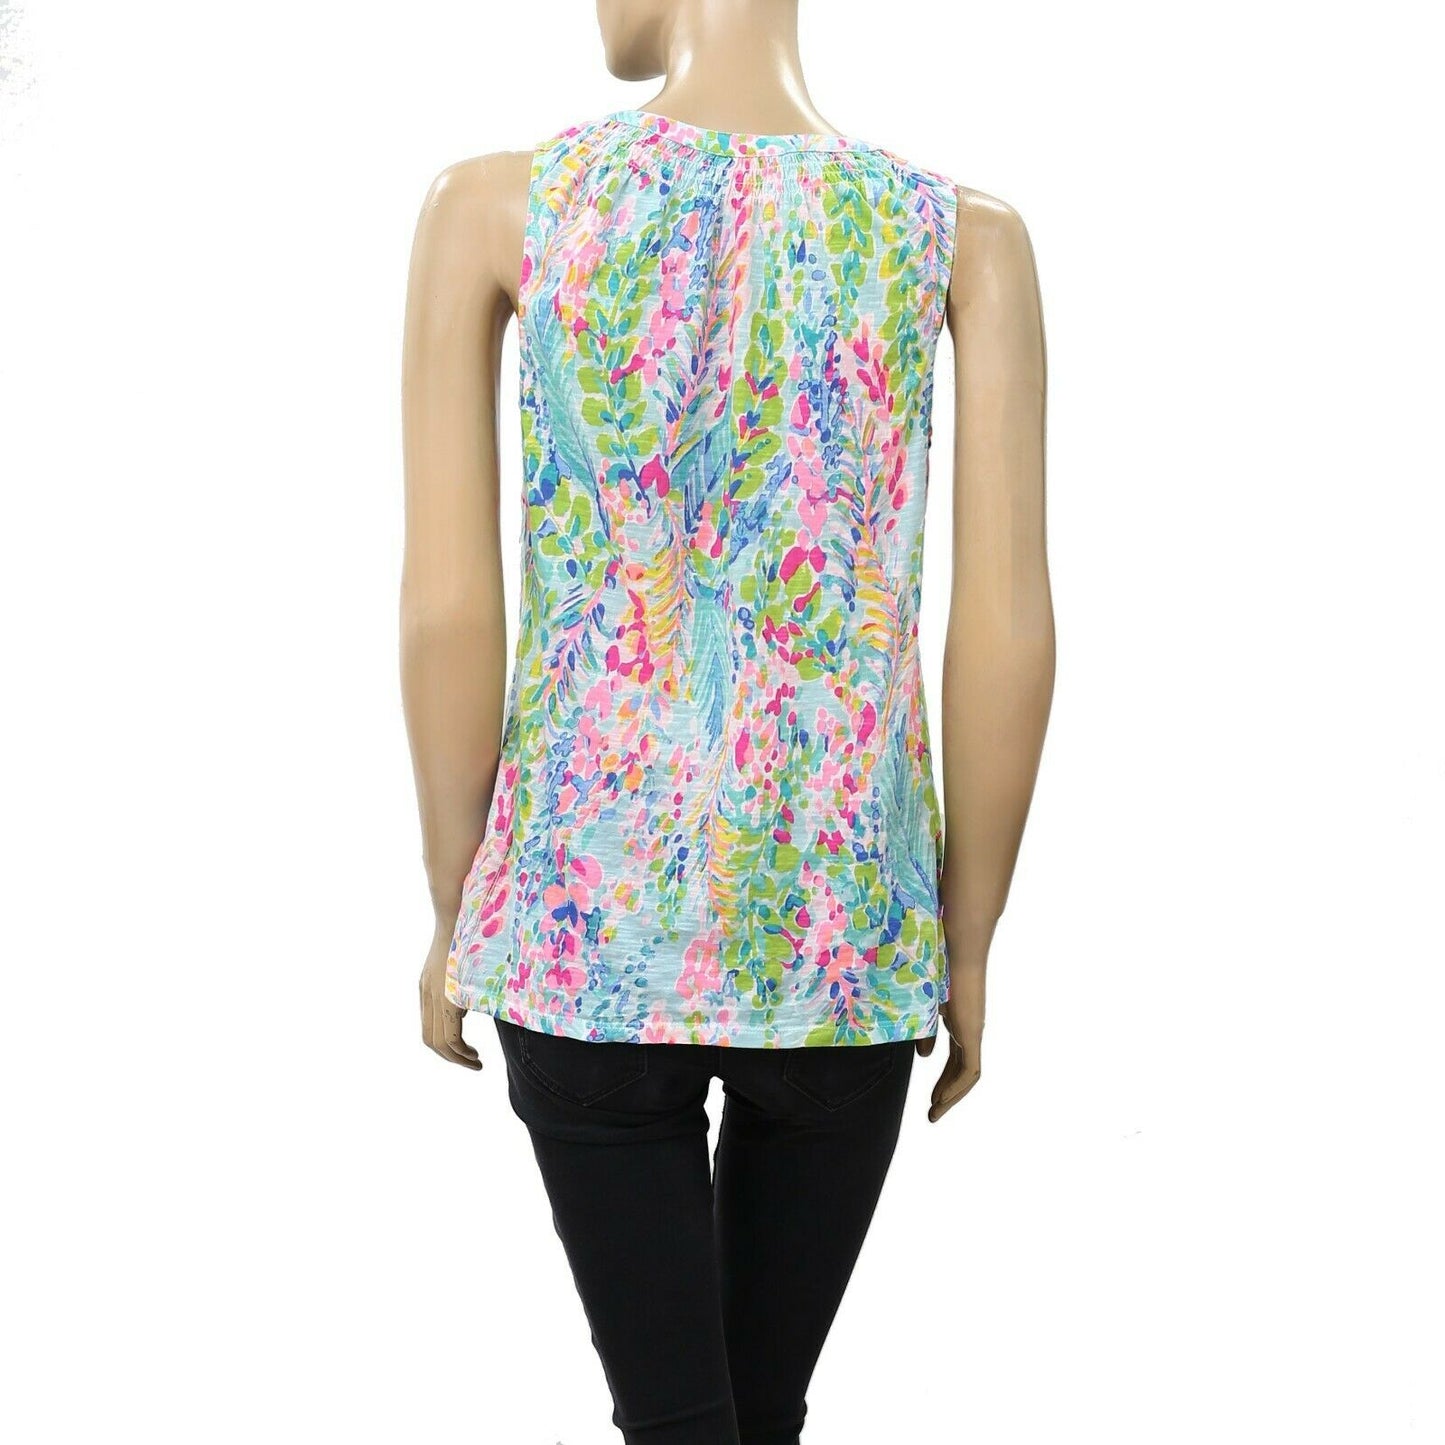 Lilly Pulitzer Essie Multi Catch The Wave Printed Tank Blouse Top